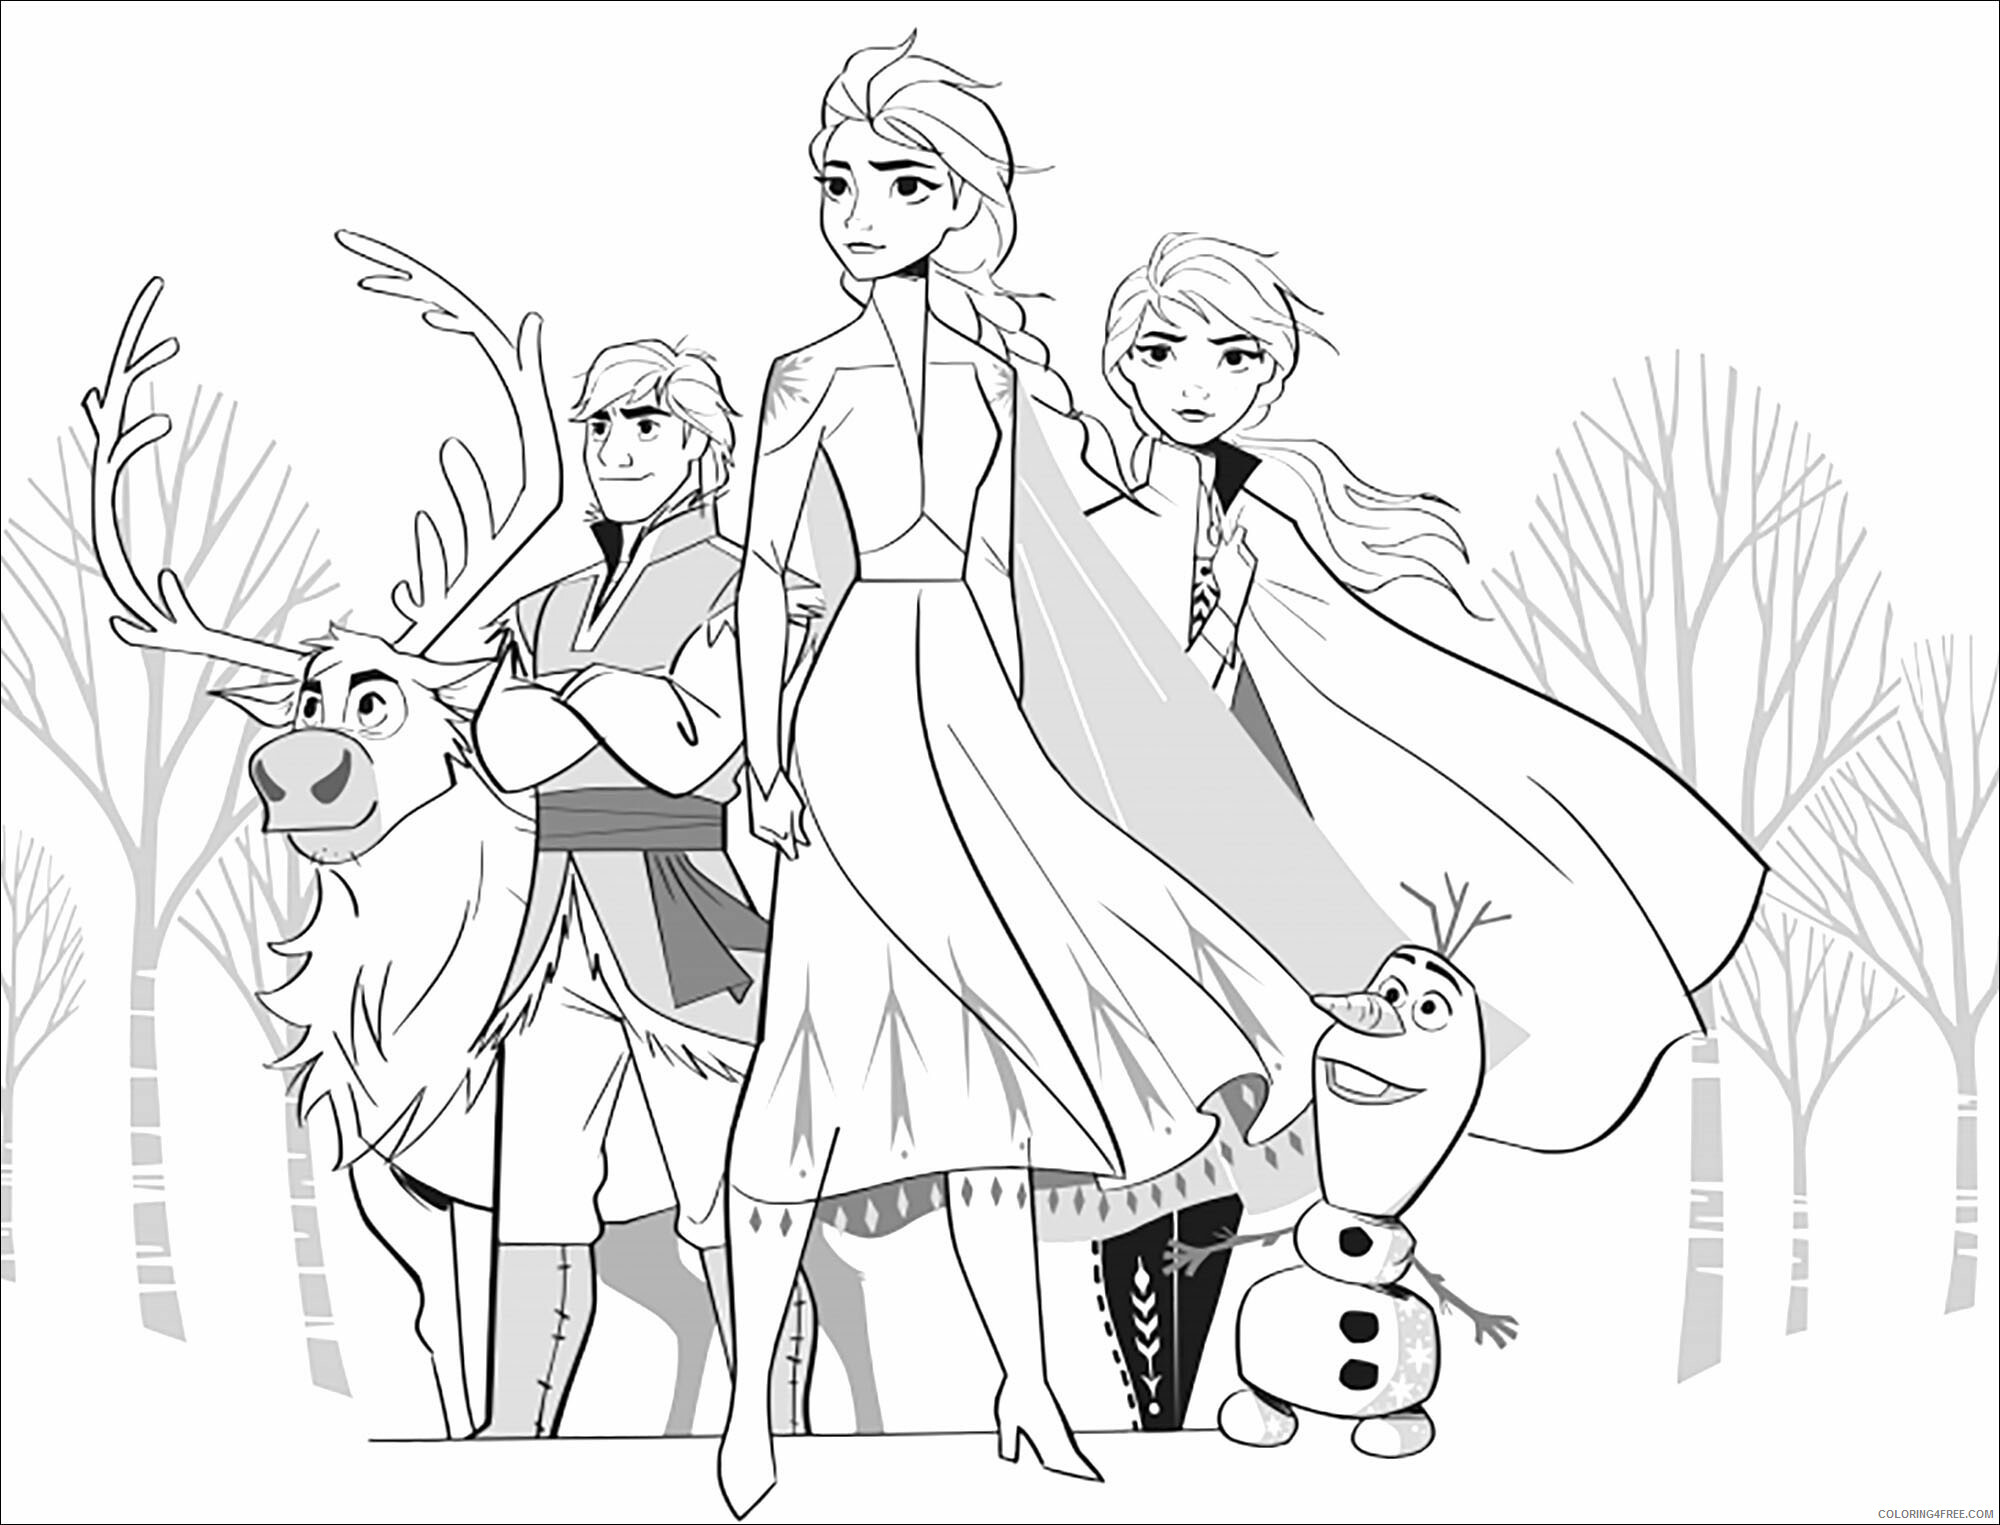 Ana Frozen 2 Coloring Pages Printable Sheets Frozen 2 Elsa Anna Olaf 2021 a 5683 Coloring4free